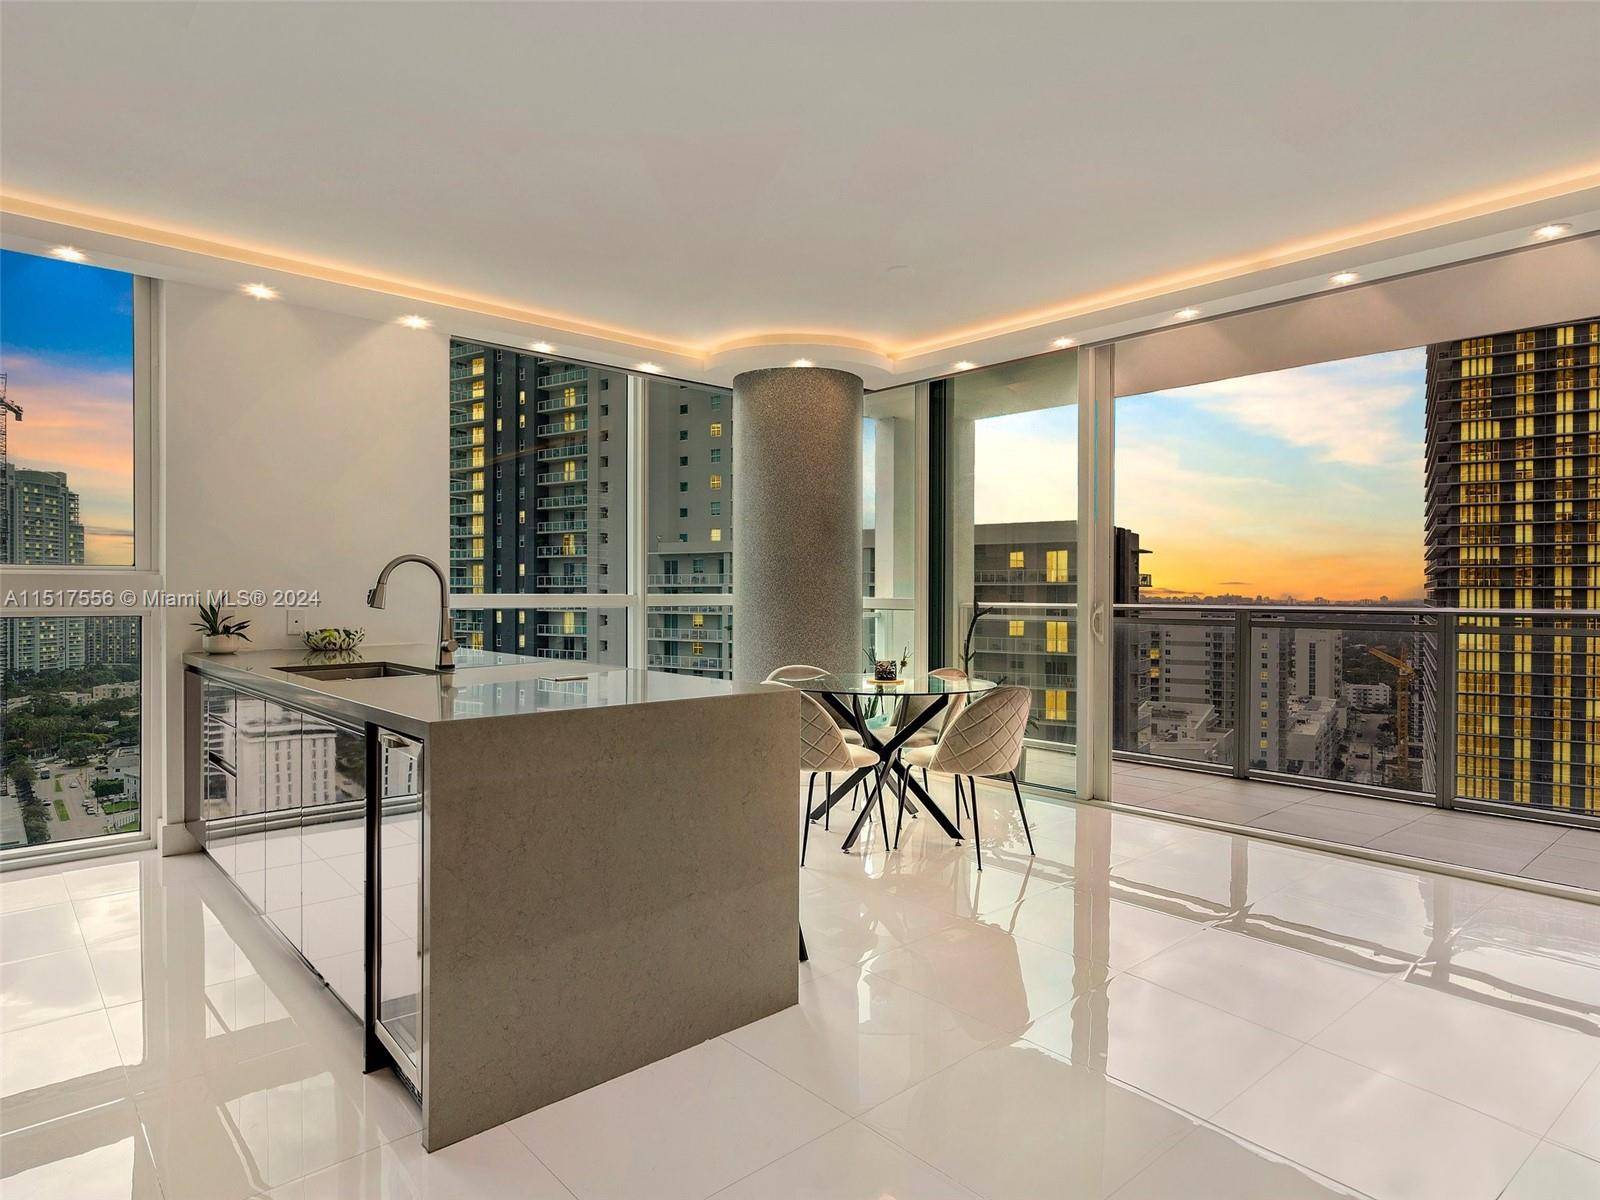 Enjoy stunning Bay views and Miami sunsets from this corner 2 bed, 2 bath fully furnished unit at The Bond on Brickell.